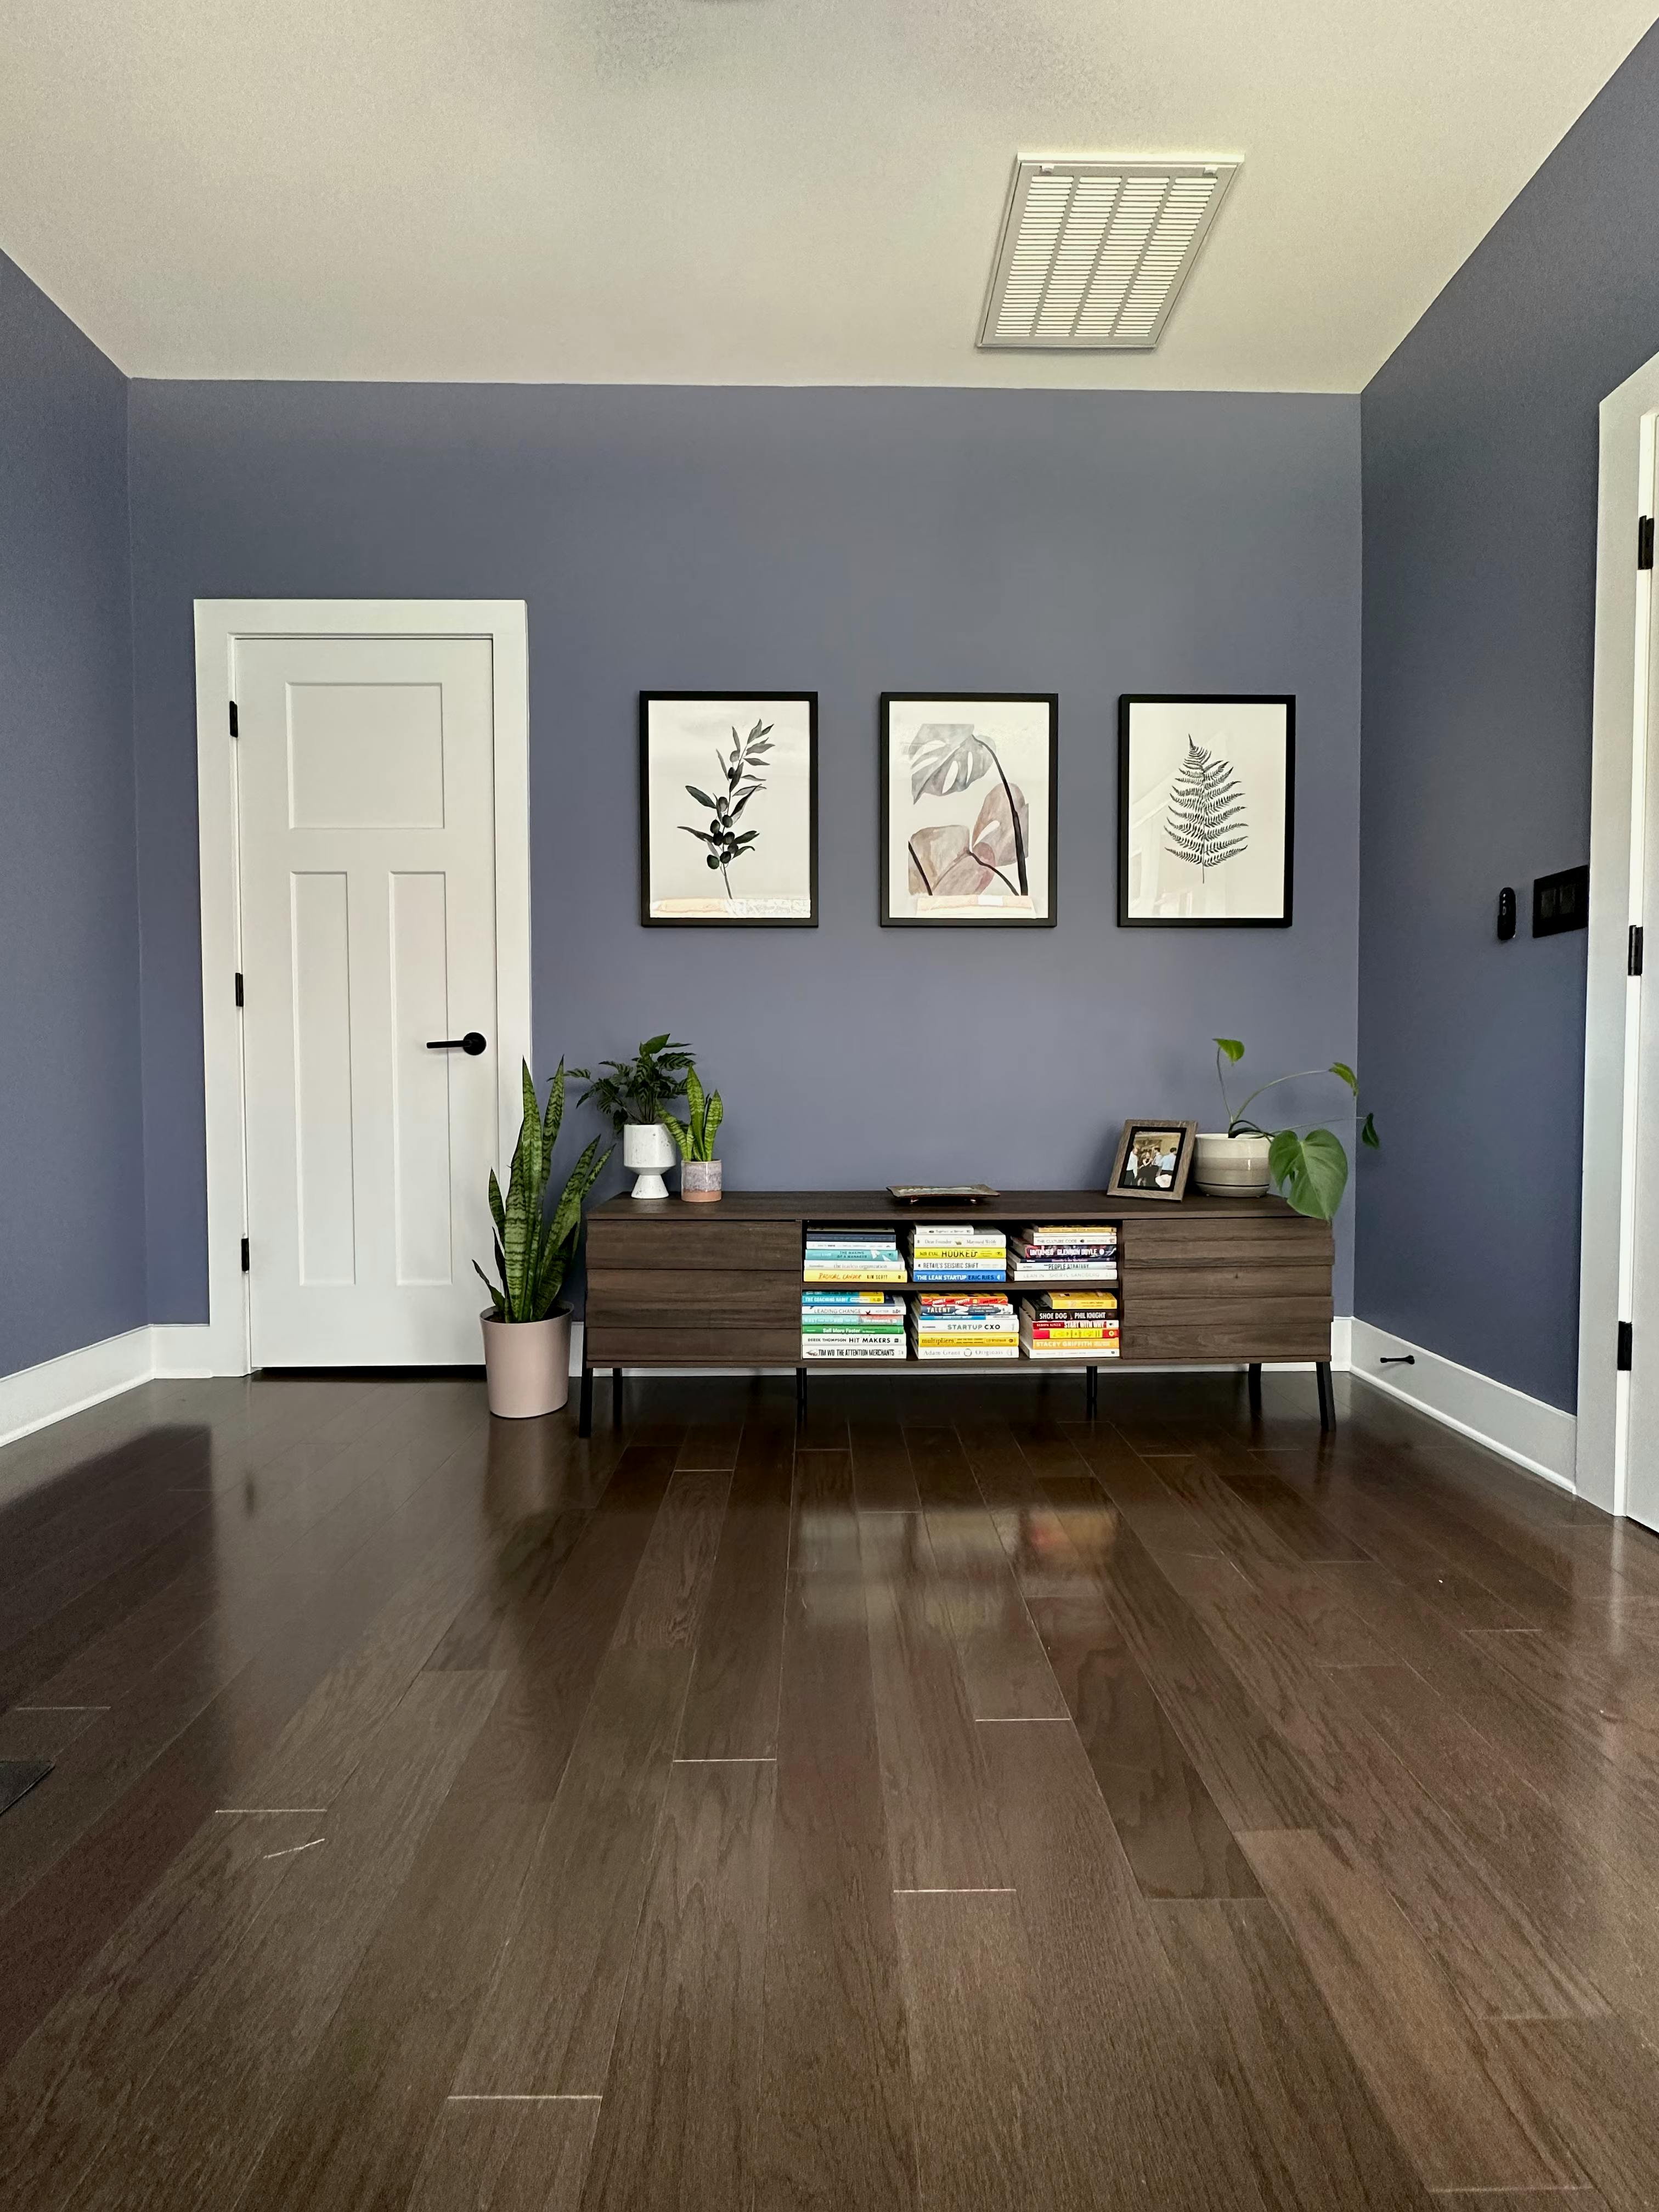 A home office in Charlotte, painted in Soulful Blue SW 6543 by Sherwin-Williams.

Interior paint project completed by Craftwork.